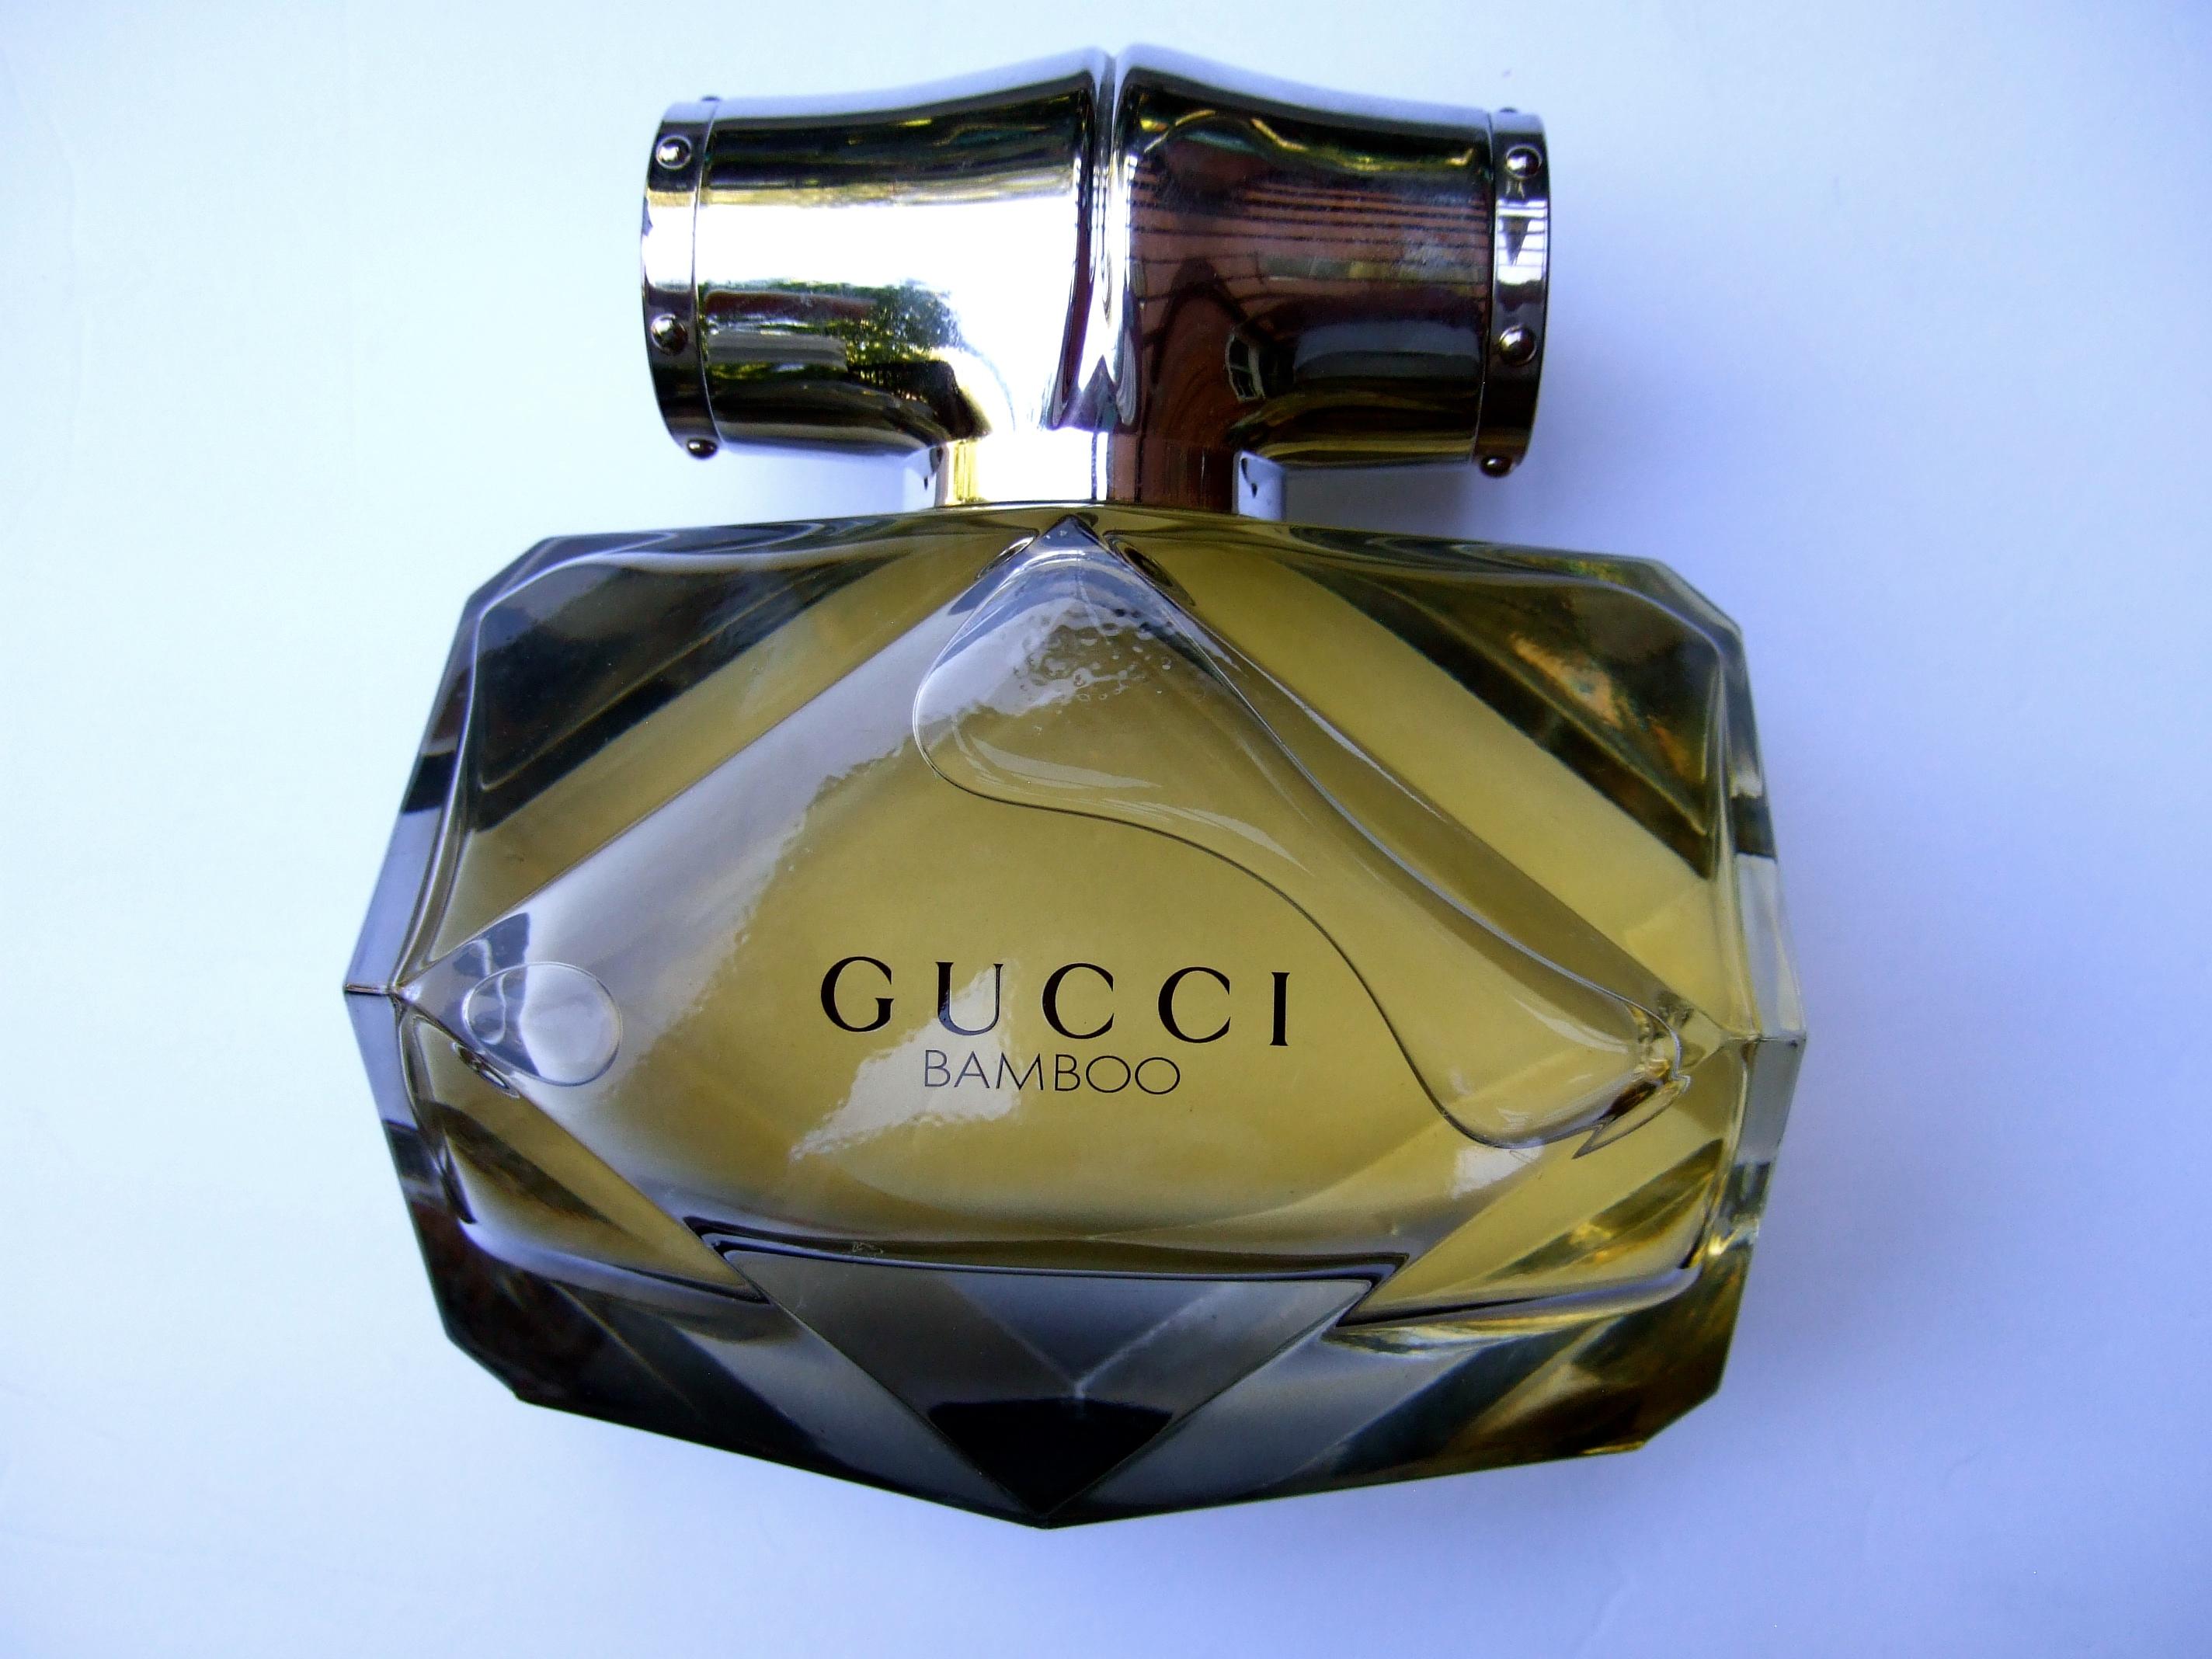 Gucci Bamboo huge scale glass factice decorative display bottle c 21st c 
The large faceted glass bottle is a replica of Gucci's bamboo fragrance 
The dummy display bottle is filled with colored water is similar to the 
designer fragrance promotion